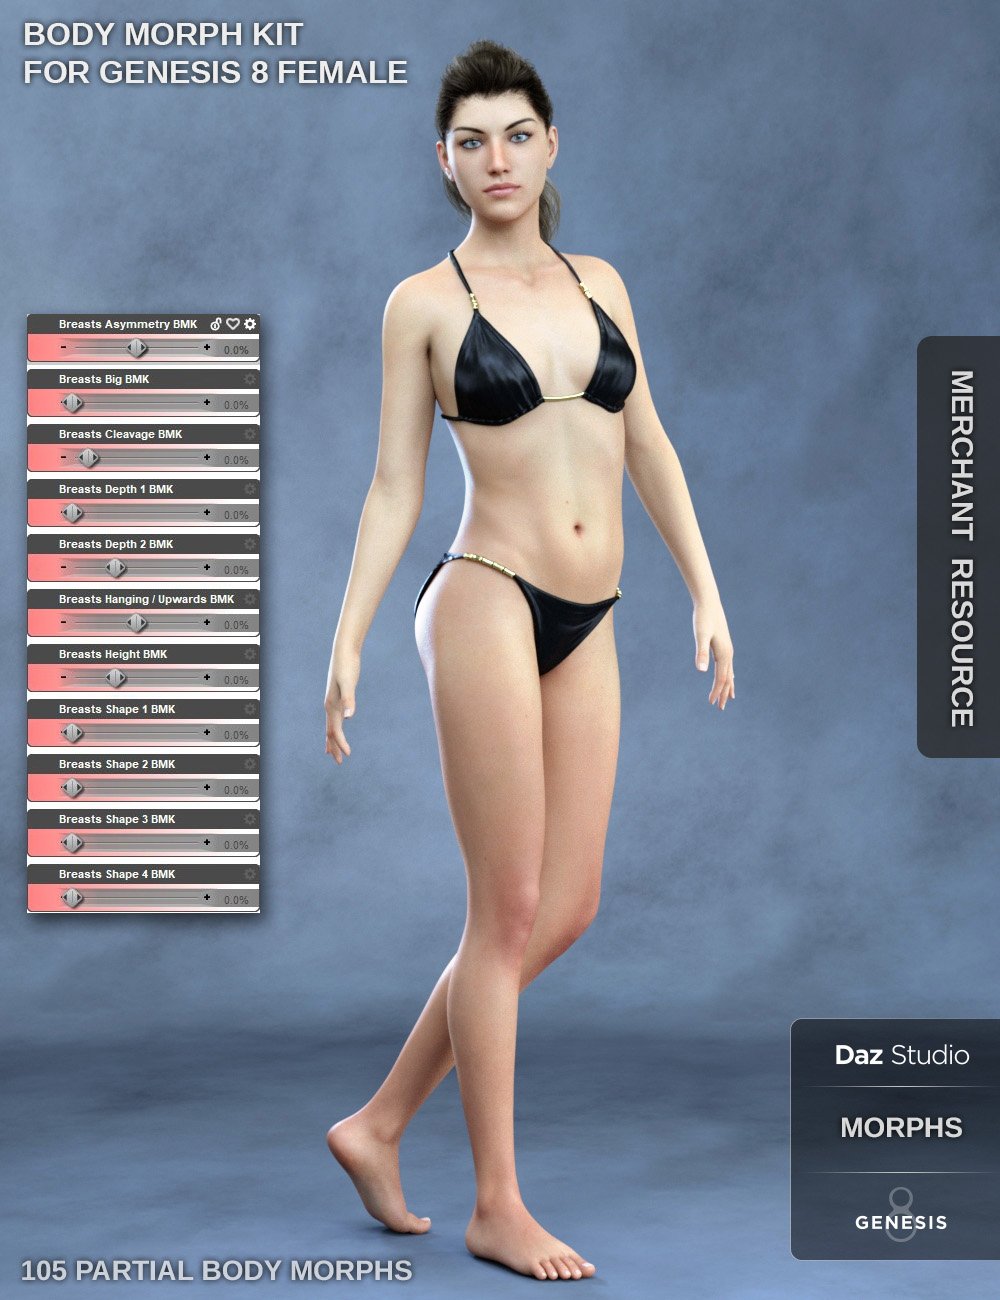 Woman breasts template 2 nipples shapes v1 3D Model in Anatomy